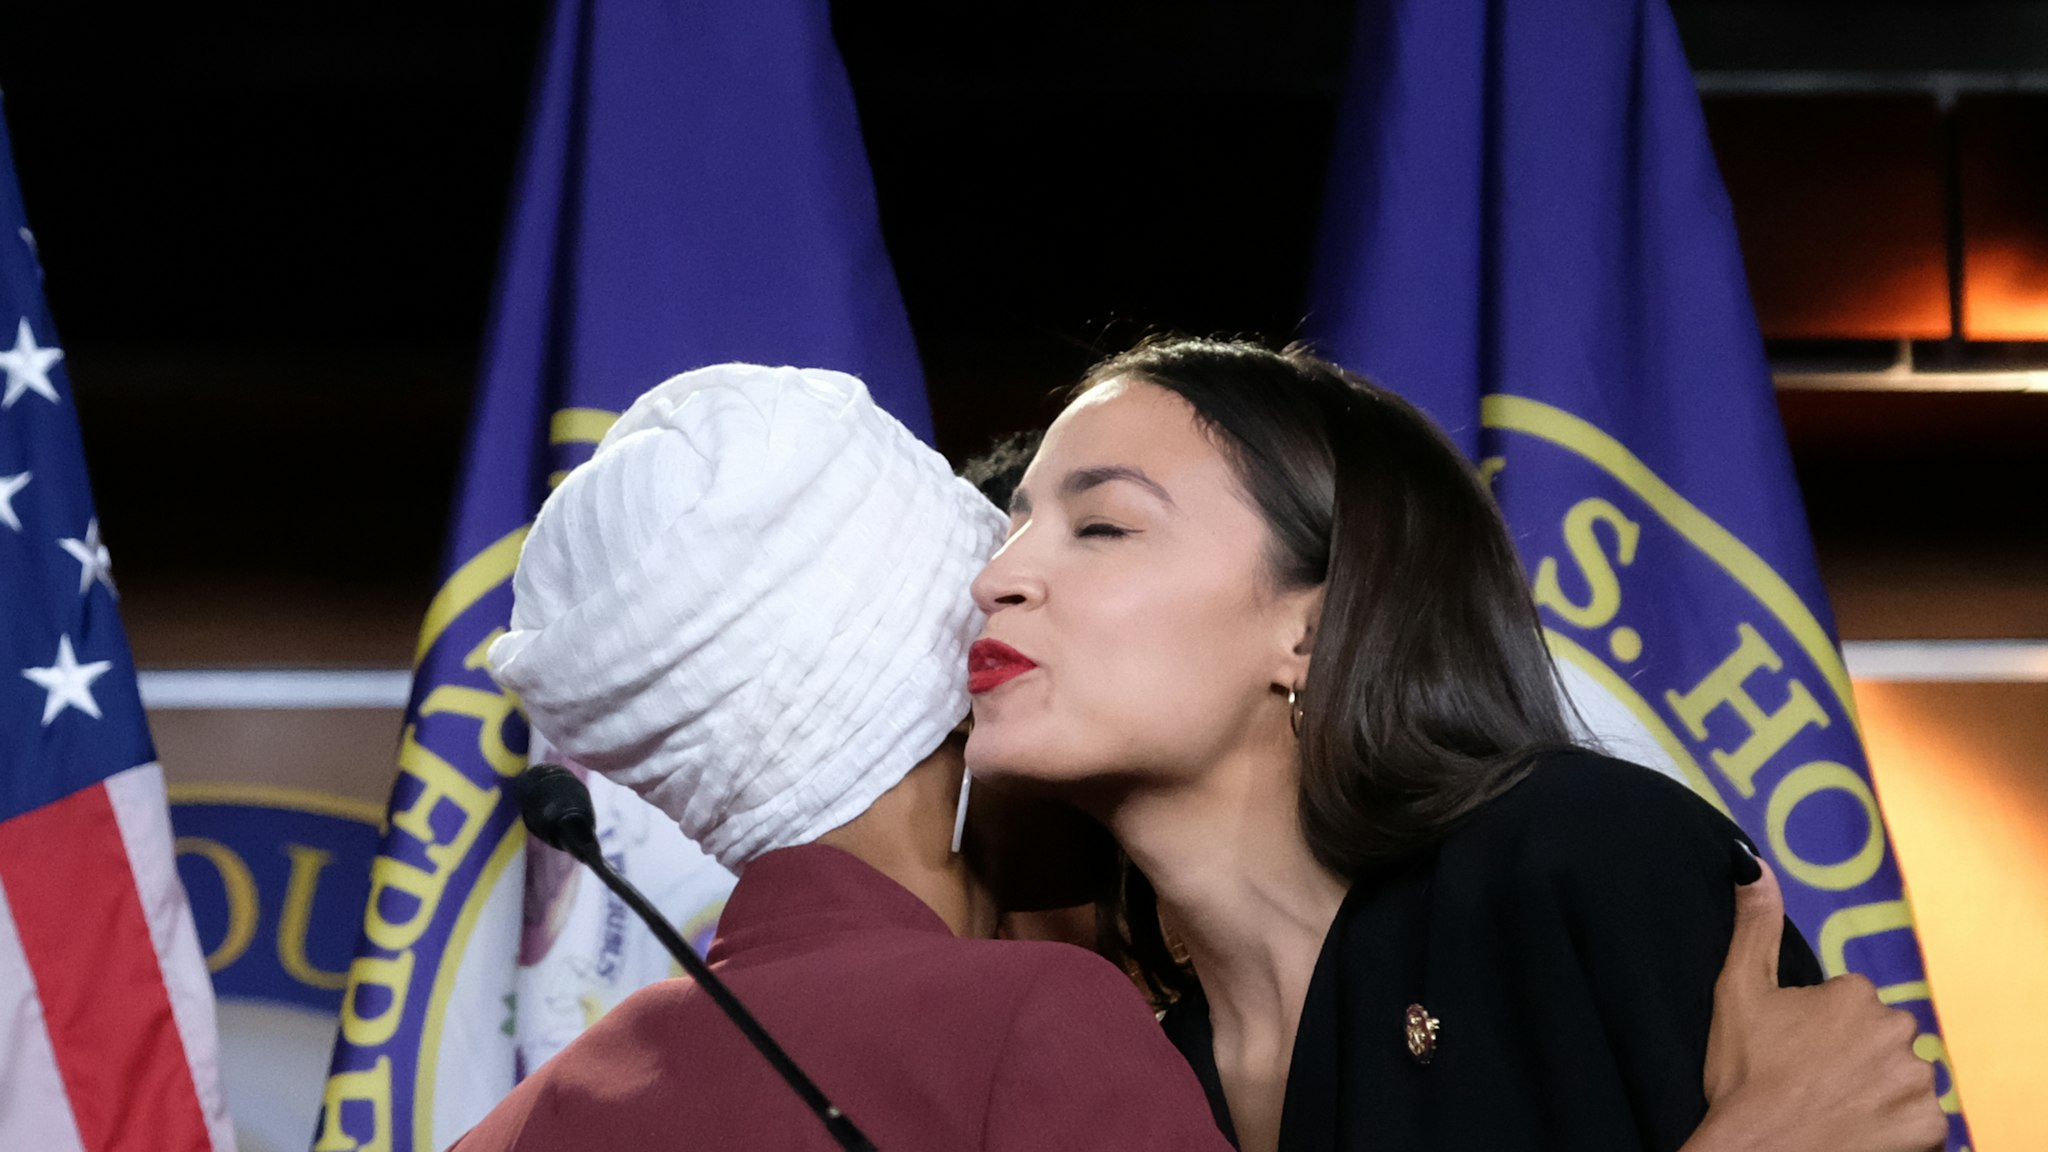 WASHINGTON, DC - JULY 15: U.S. Rep. Ilhan Omar (D-MN) and Rep. Alexandria Ocasio-Cortez (D-NY), hug between answering questions during a press conference at the U.S. Capitol, on July 15, 2019 in Washington, DC. President Donald Trump stepped up his attacks on four progressive Democratic congresswomen, saying if they're not happy in the United States "they can leave." (Photo by Alex Wroblewski/Getty Images)